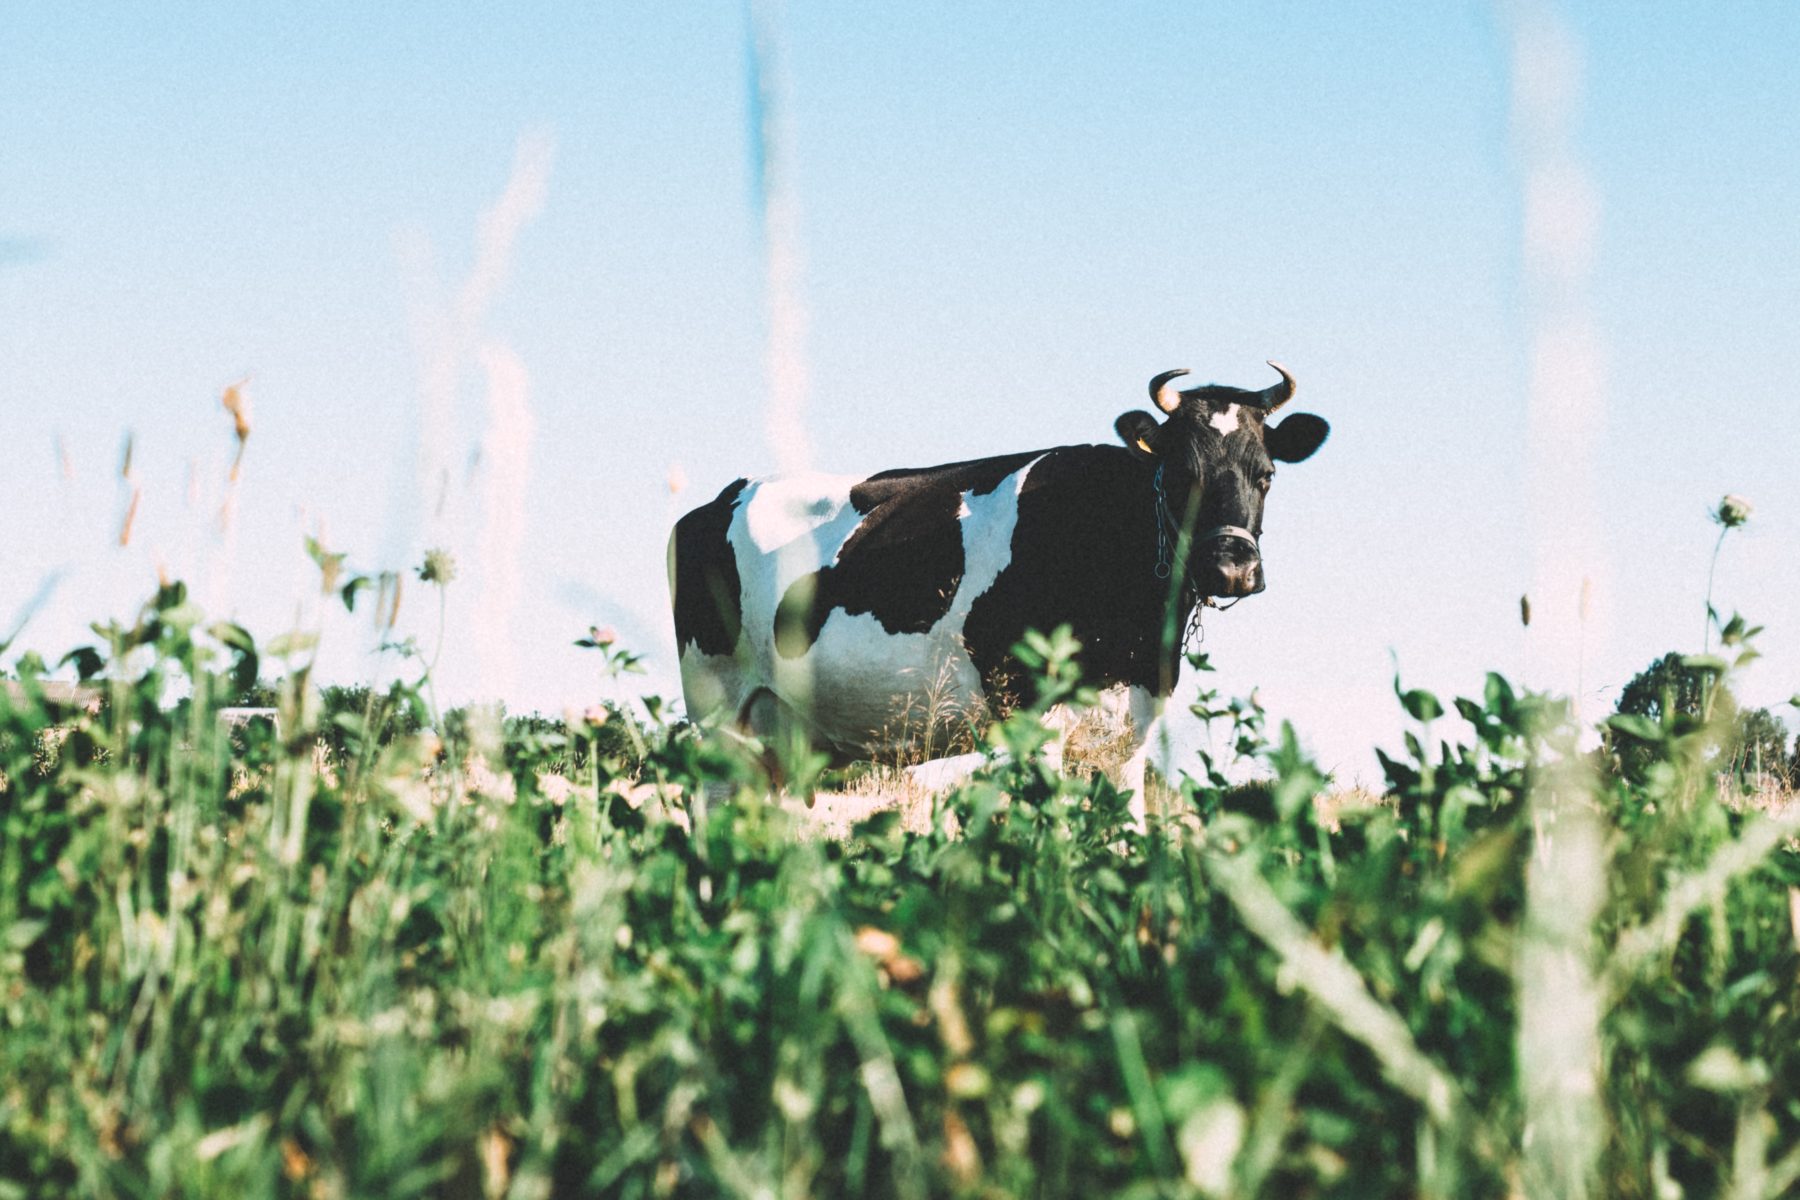 A portrait of a cow walking in the grass.